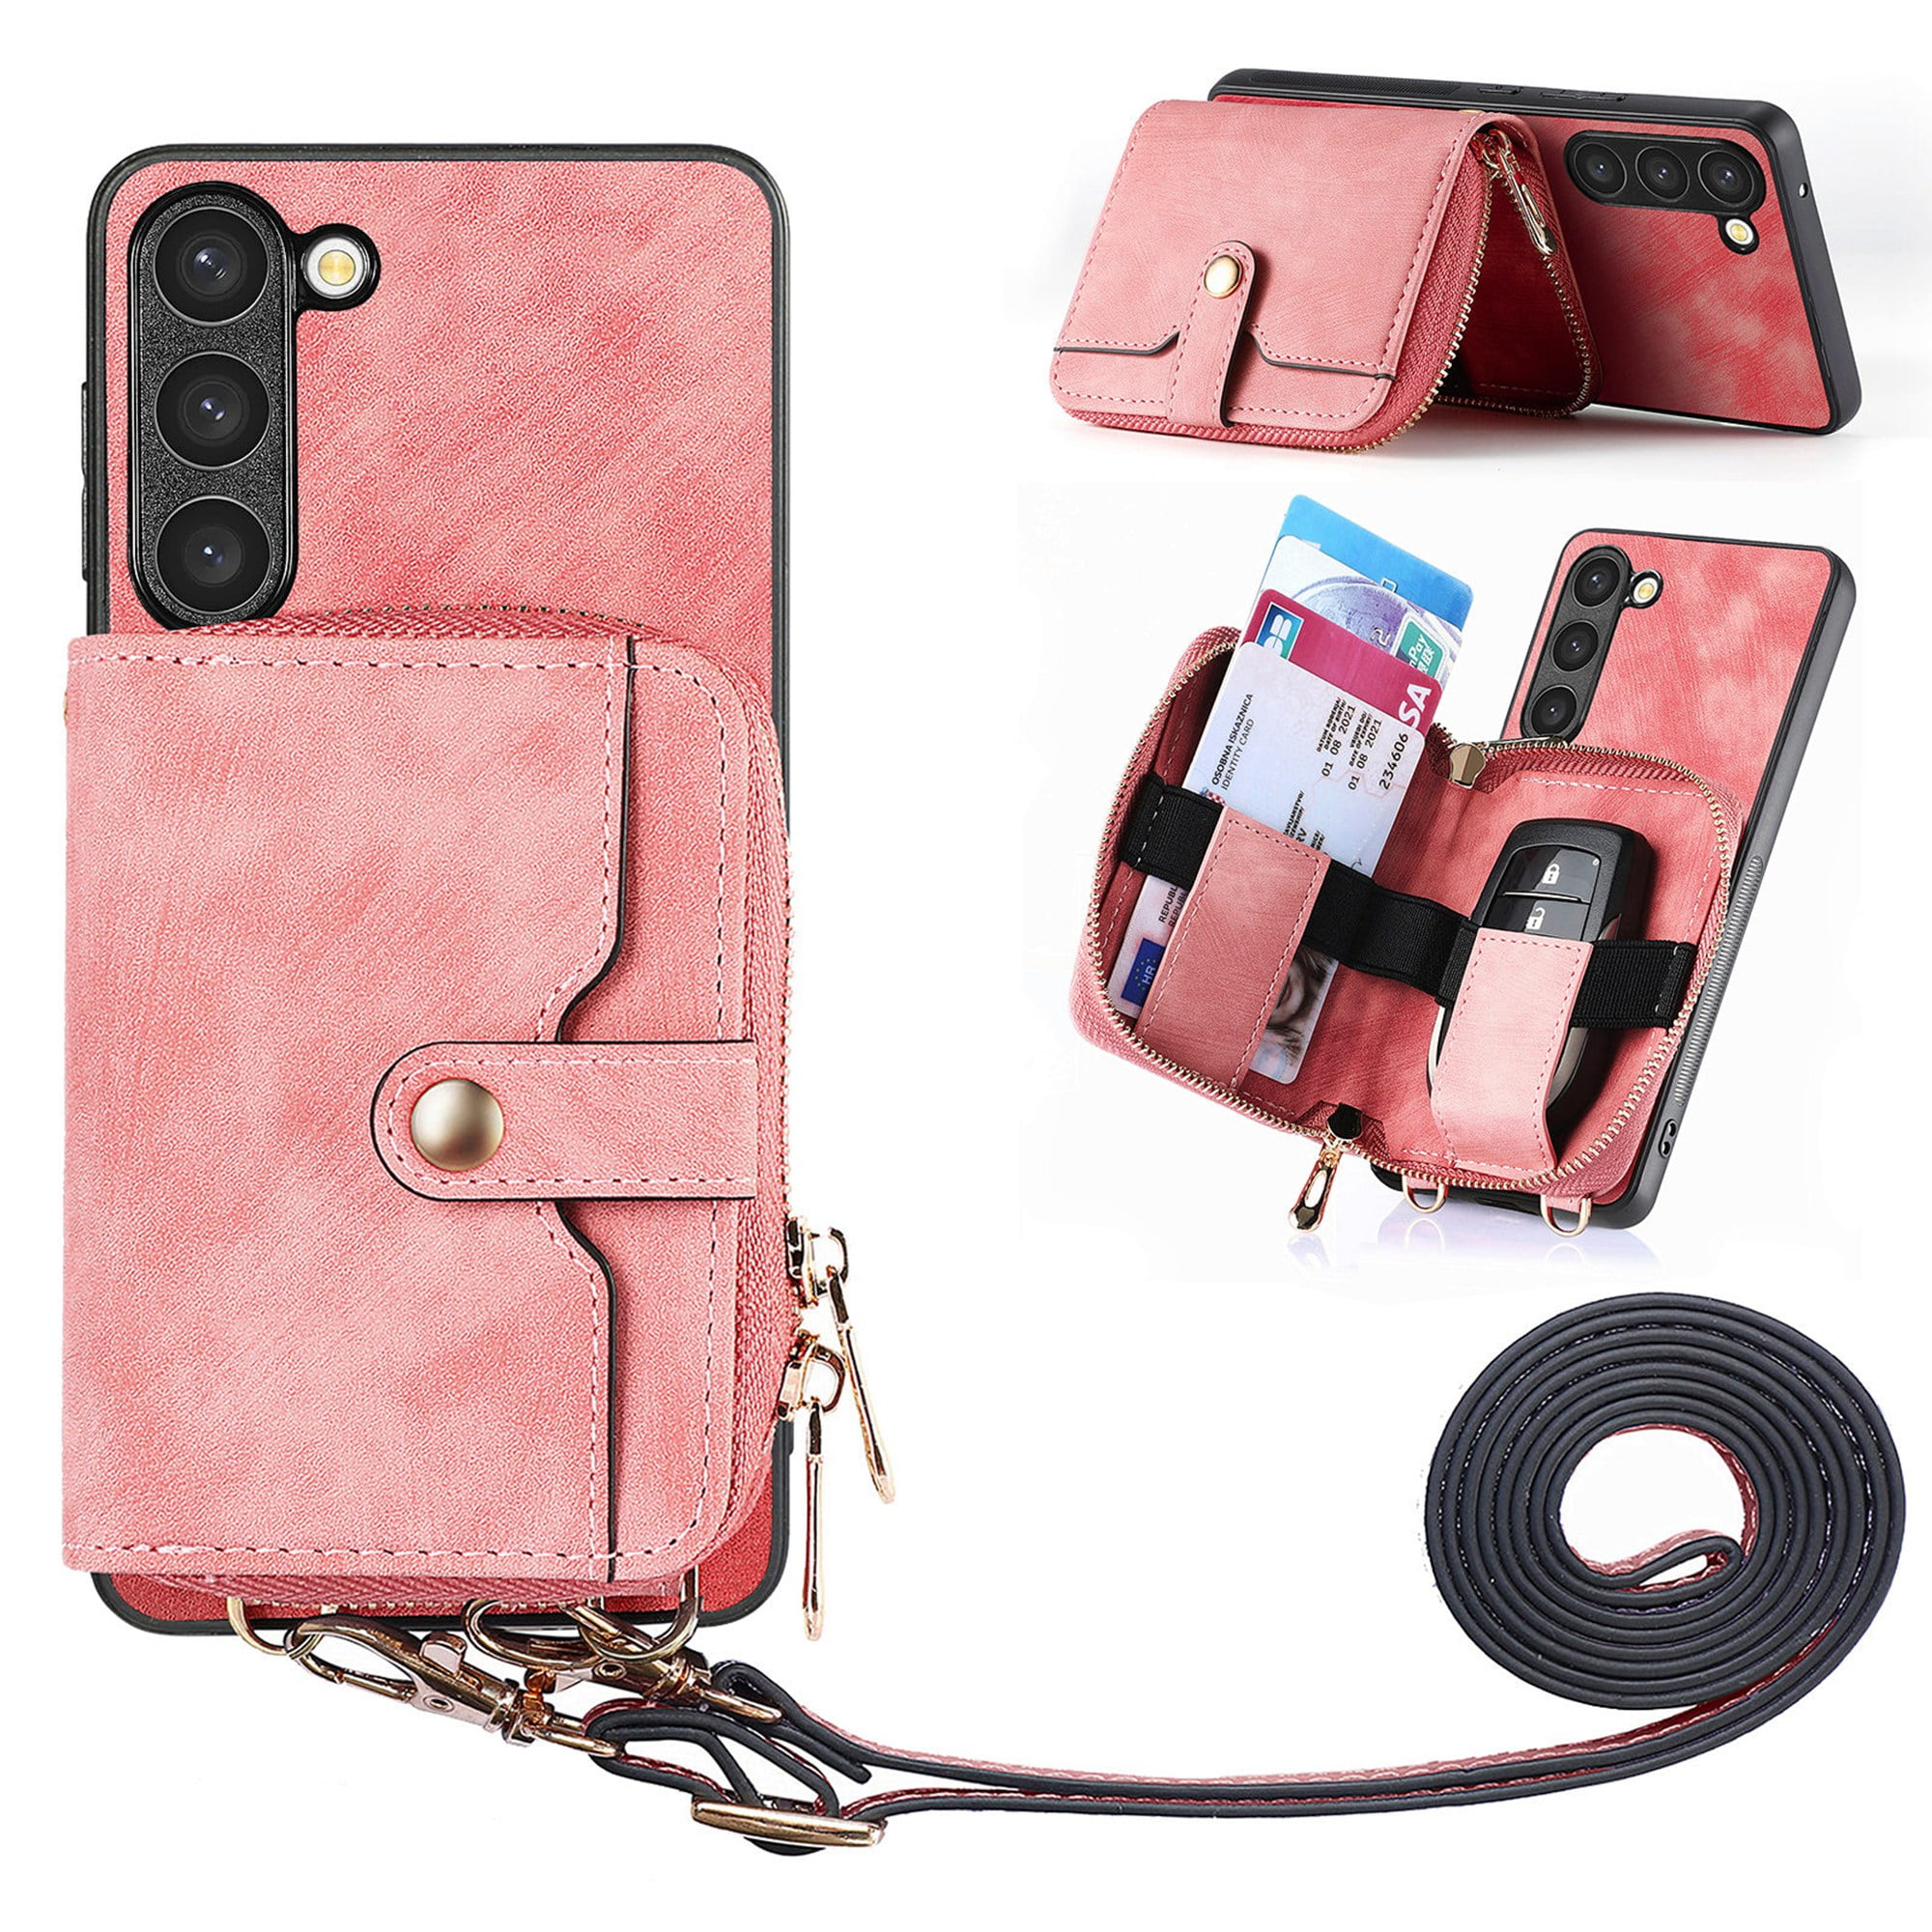 Leather Wallet Purse Magnetic Removable Flip Case For Samsung Note  20,iPhone X 8 | eBay